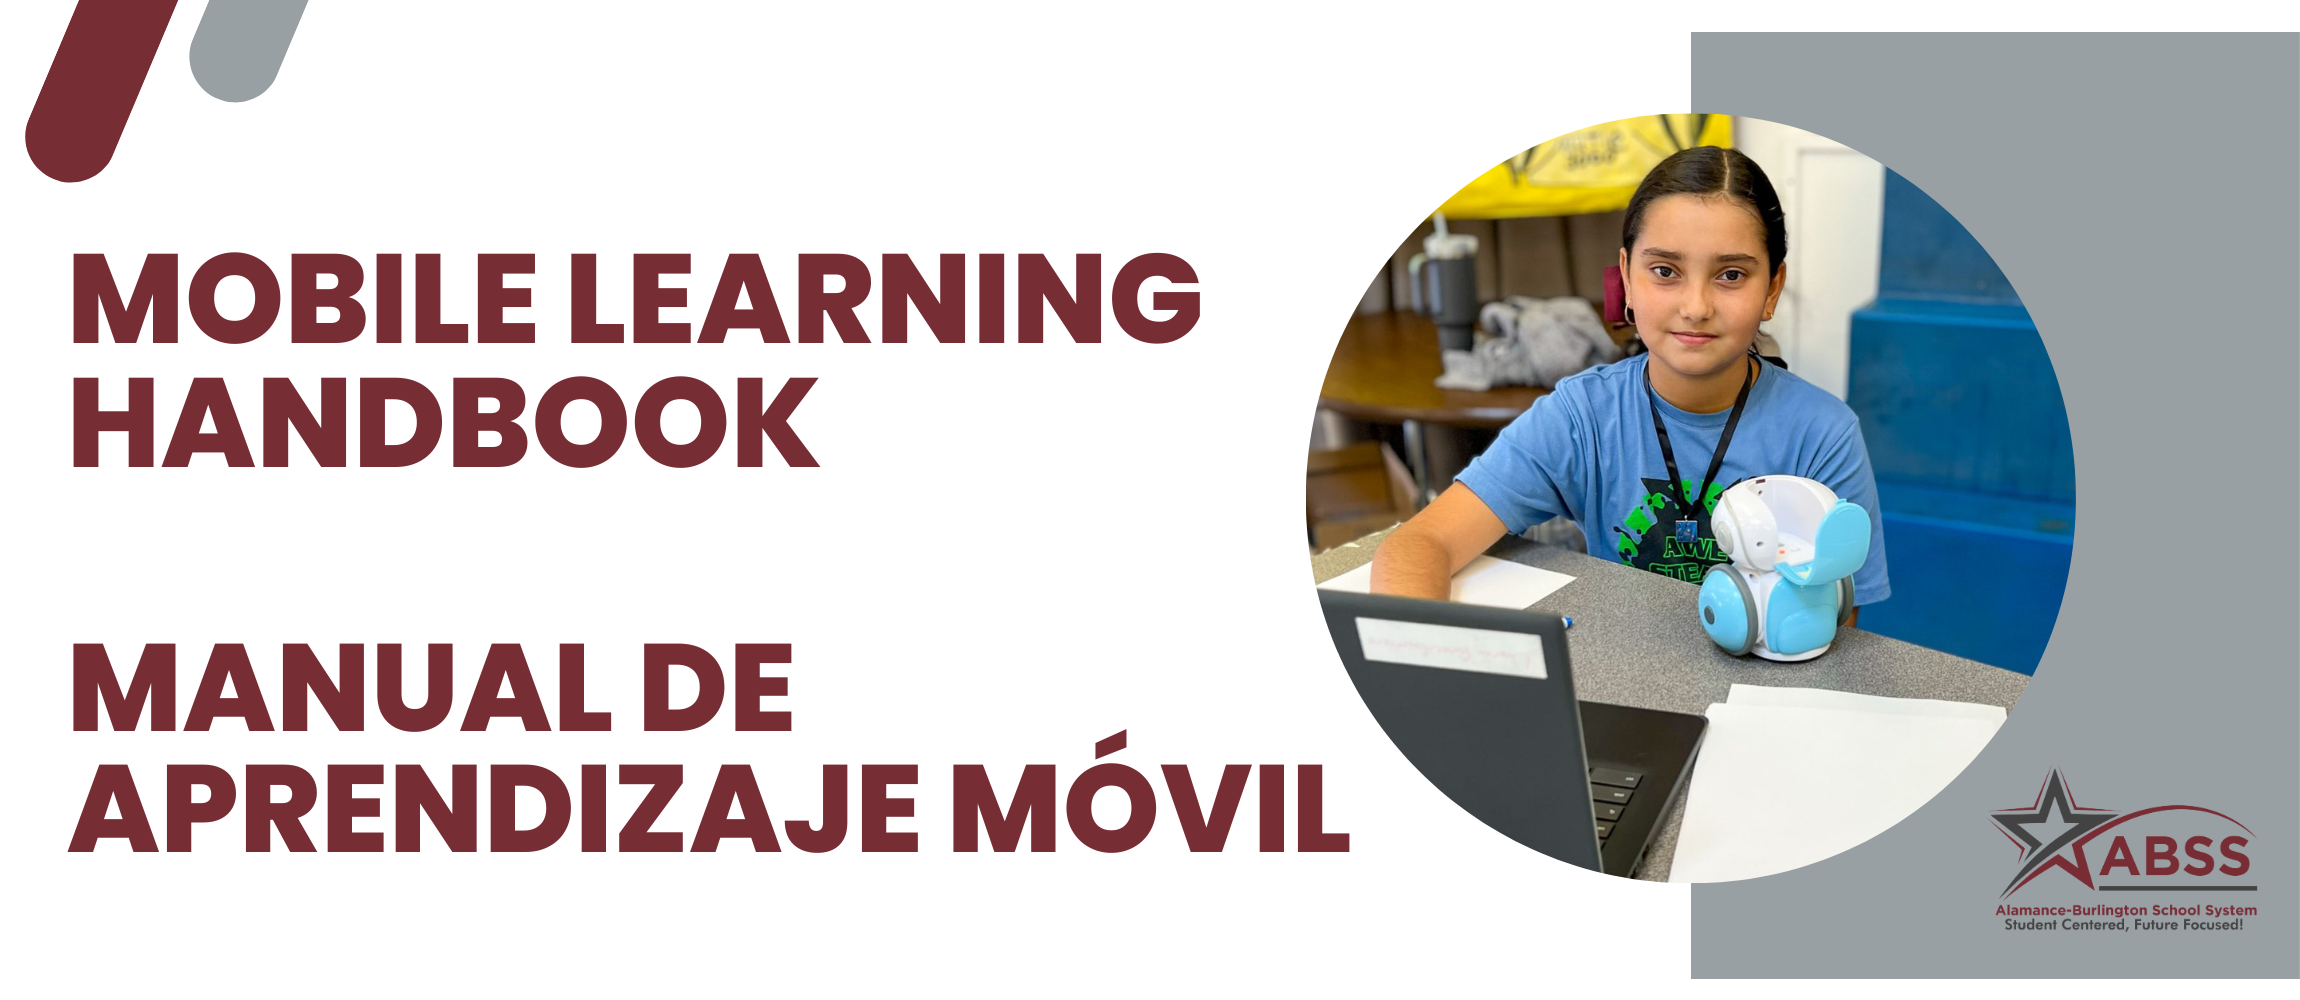 Banner with the text "Mobile Learning Handbook" in English and Spanish with a picture of a student using a laptop computer